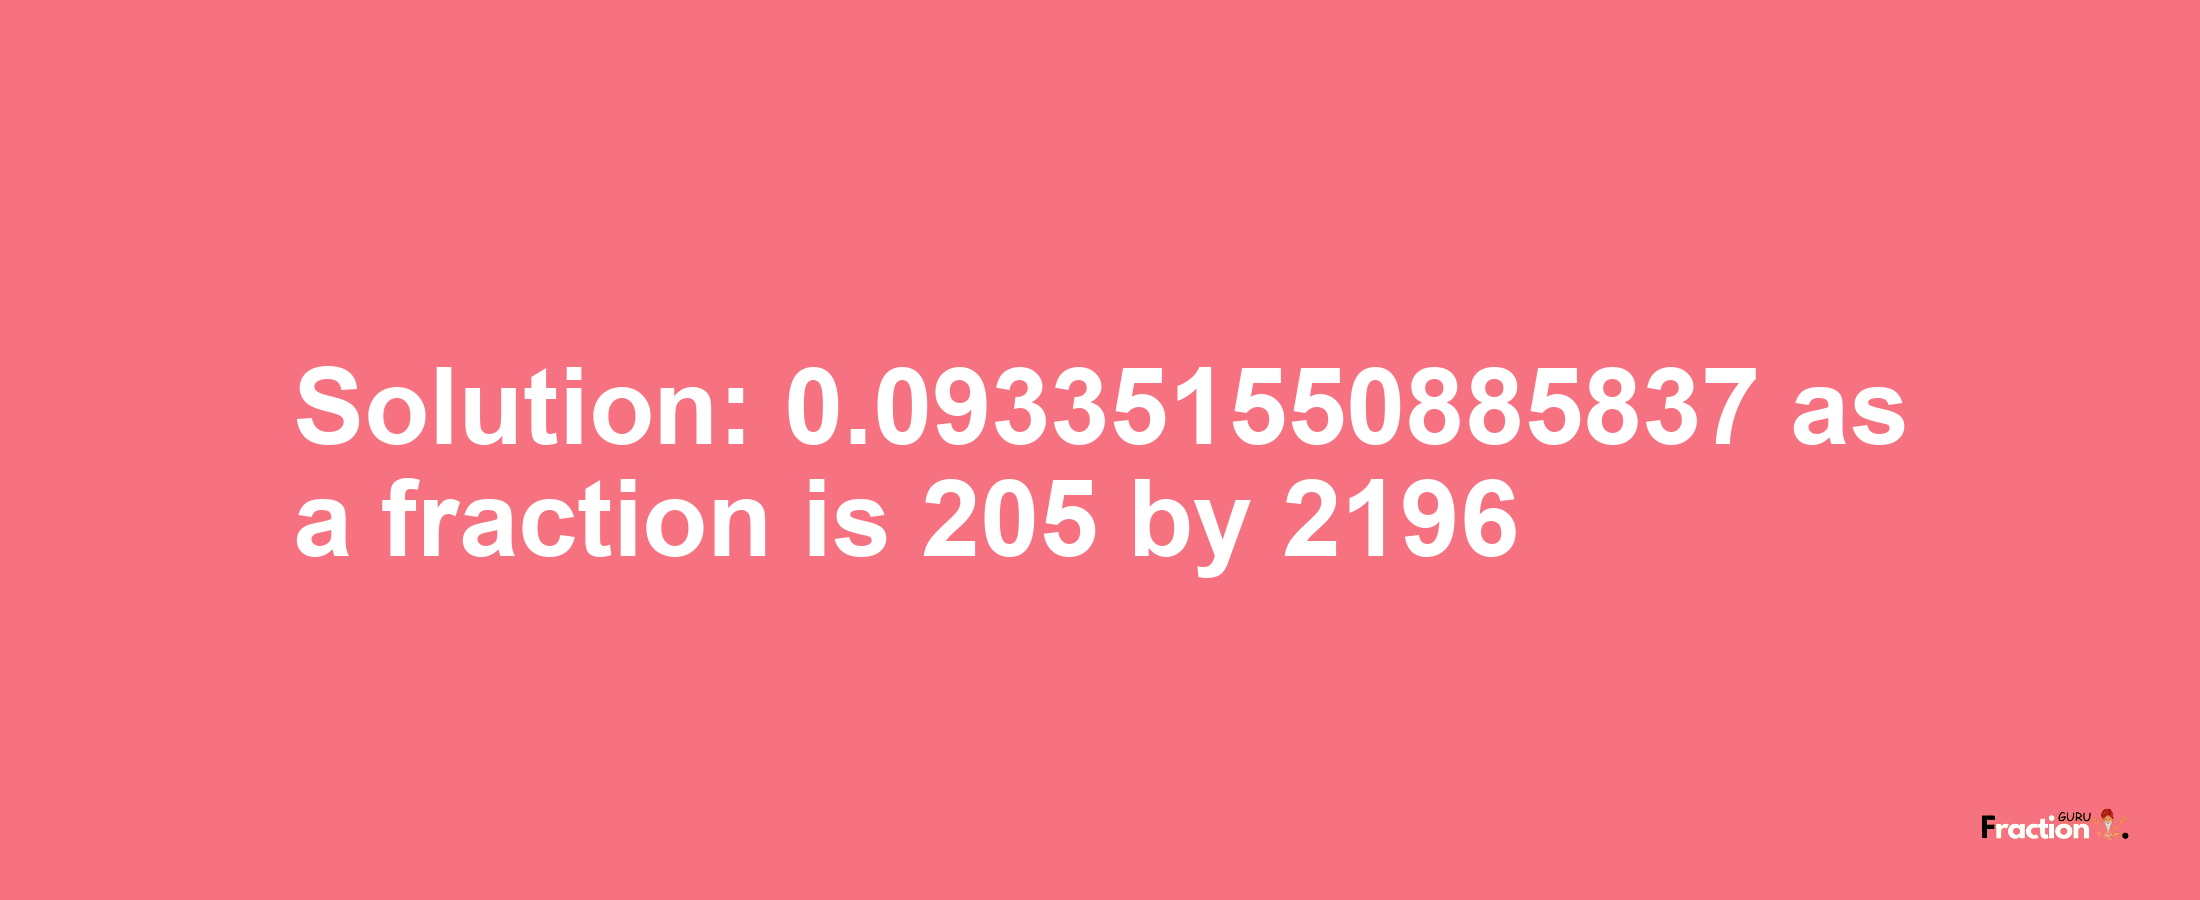 Solution:0.093351550885837 as a fraction is 205/2196